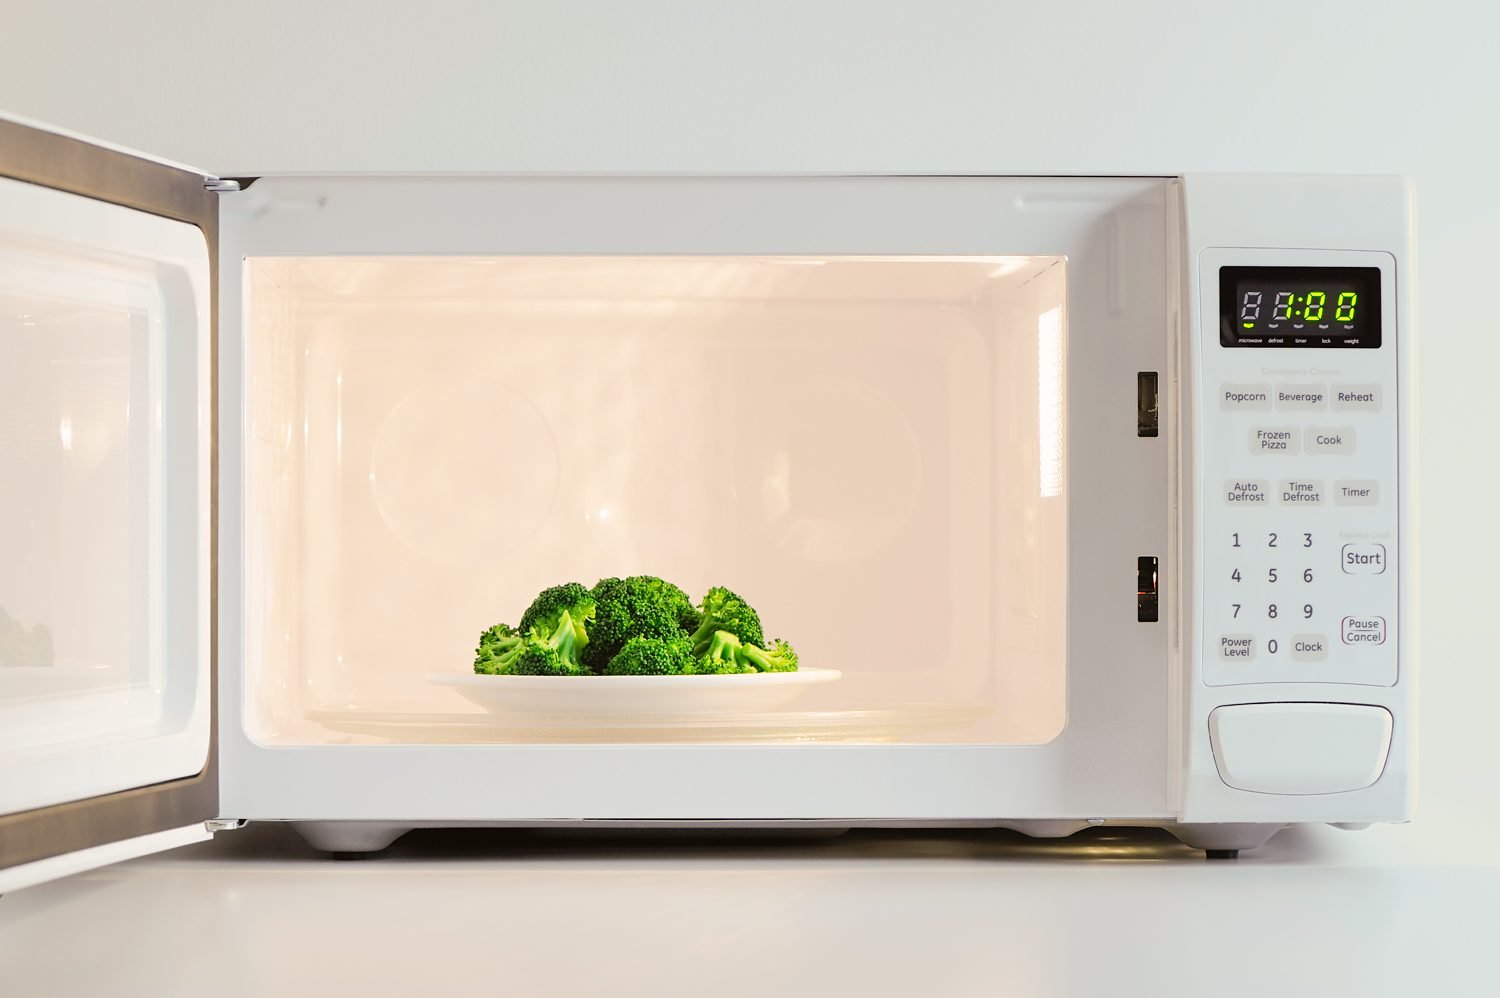 https://www.rd.com/wp-content/uploads/2023/11/Getty-157403041-Resize-Recolor-Crop-DH-RD-Why-You-Should-Be-Using-This-Microwave-Button.jpg